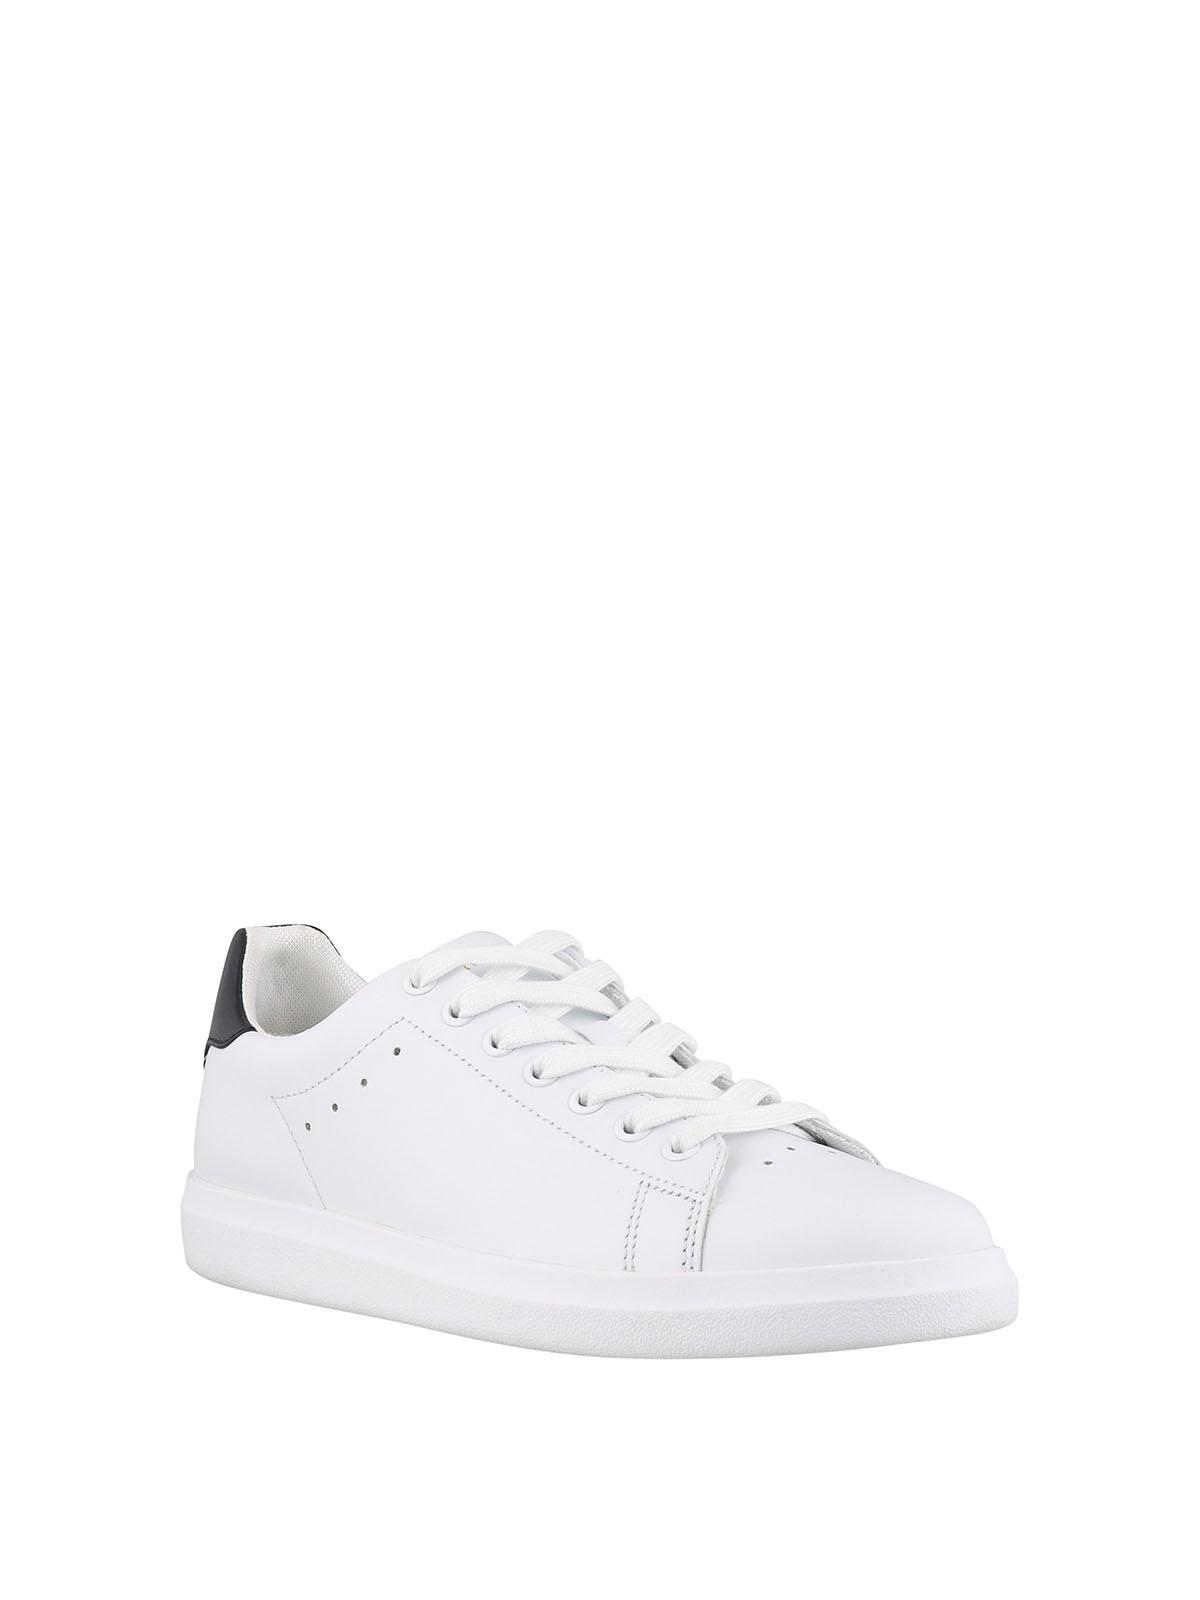 Tory Burch Howell Court Leather Sneakers in White - Lyst